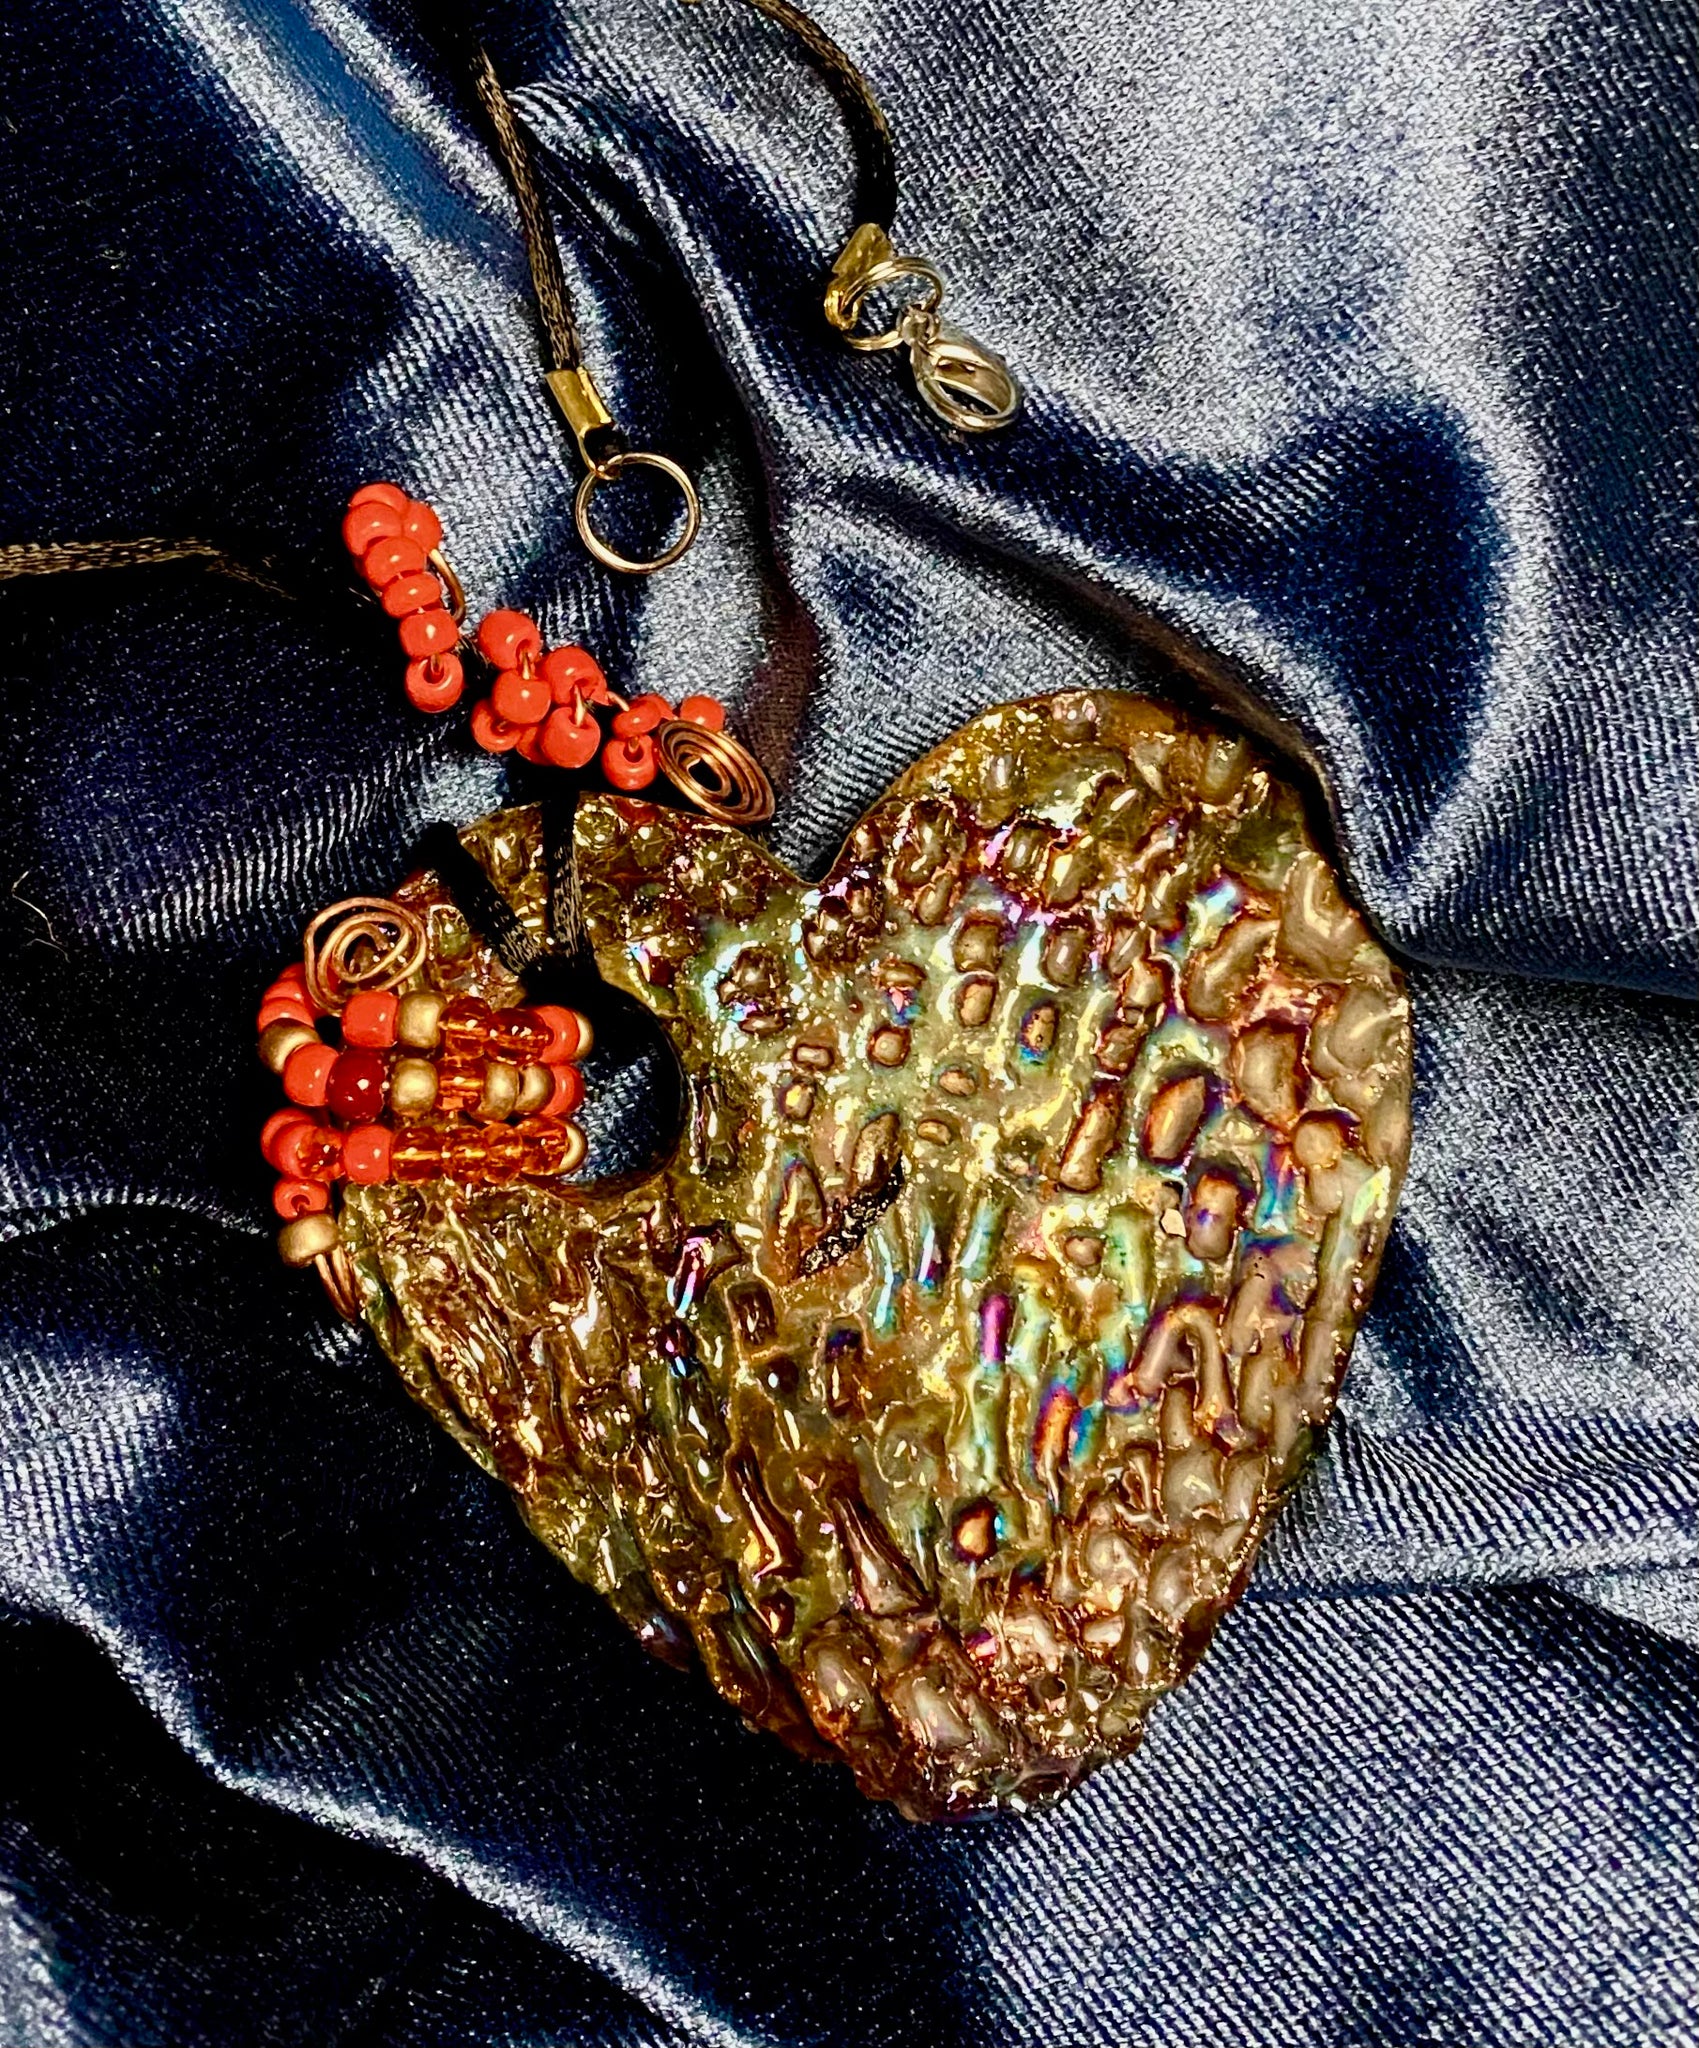  Have A Heart ! Each heart pendant is handmade with love! It is 3"x 3" and weighs approx. 3ozs. This pendant has a copper gold metallic raku glazes that renders a unique translucent  patina. The heart has a textured pattern . It holds a spiral of amber and red mini beads on a spiral copper wire. This pendant has a nice 12" black suede cord!